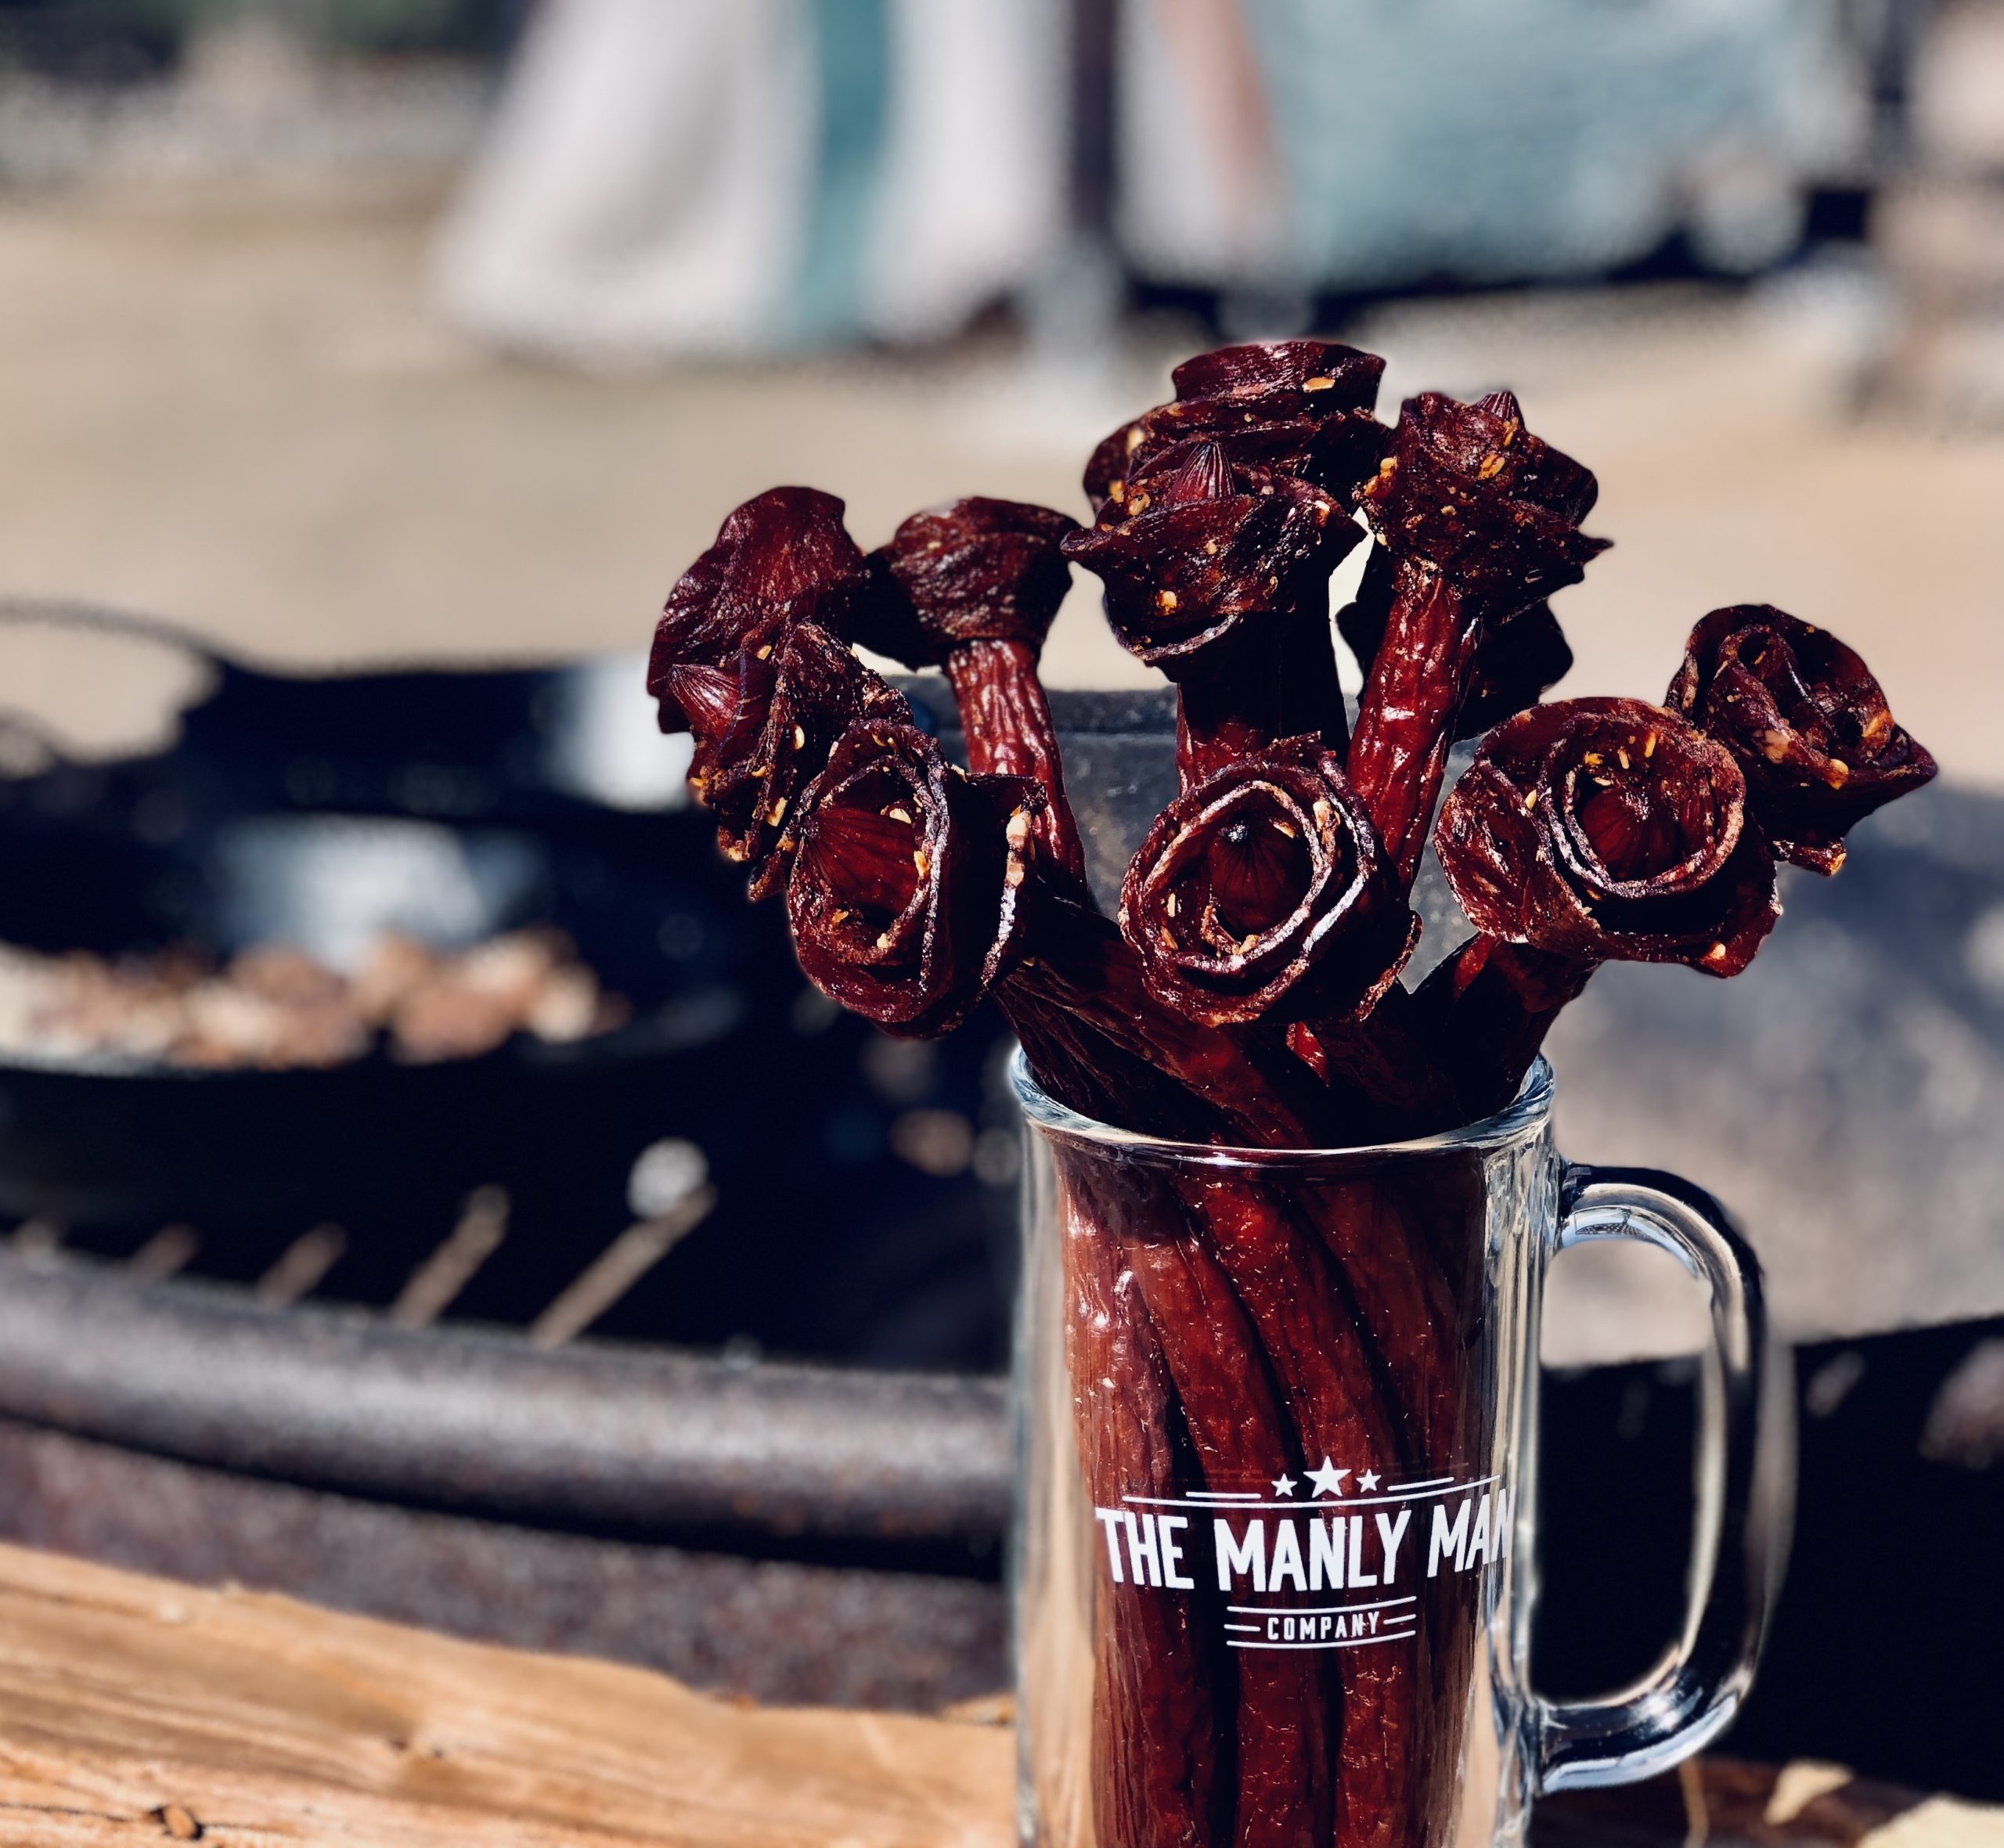 Manly Man Beef Jerky Flowers